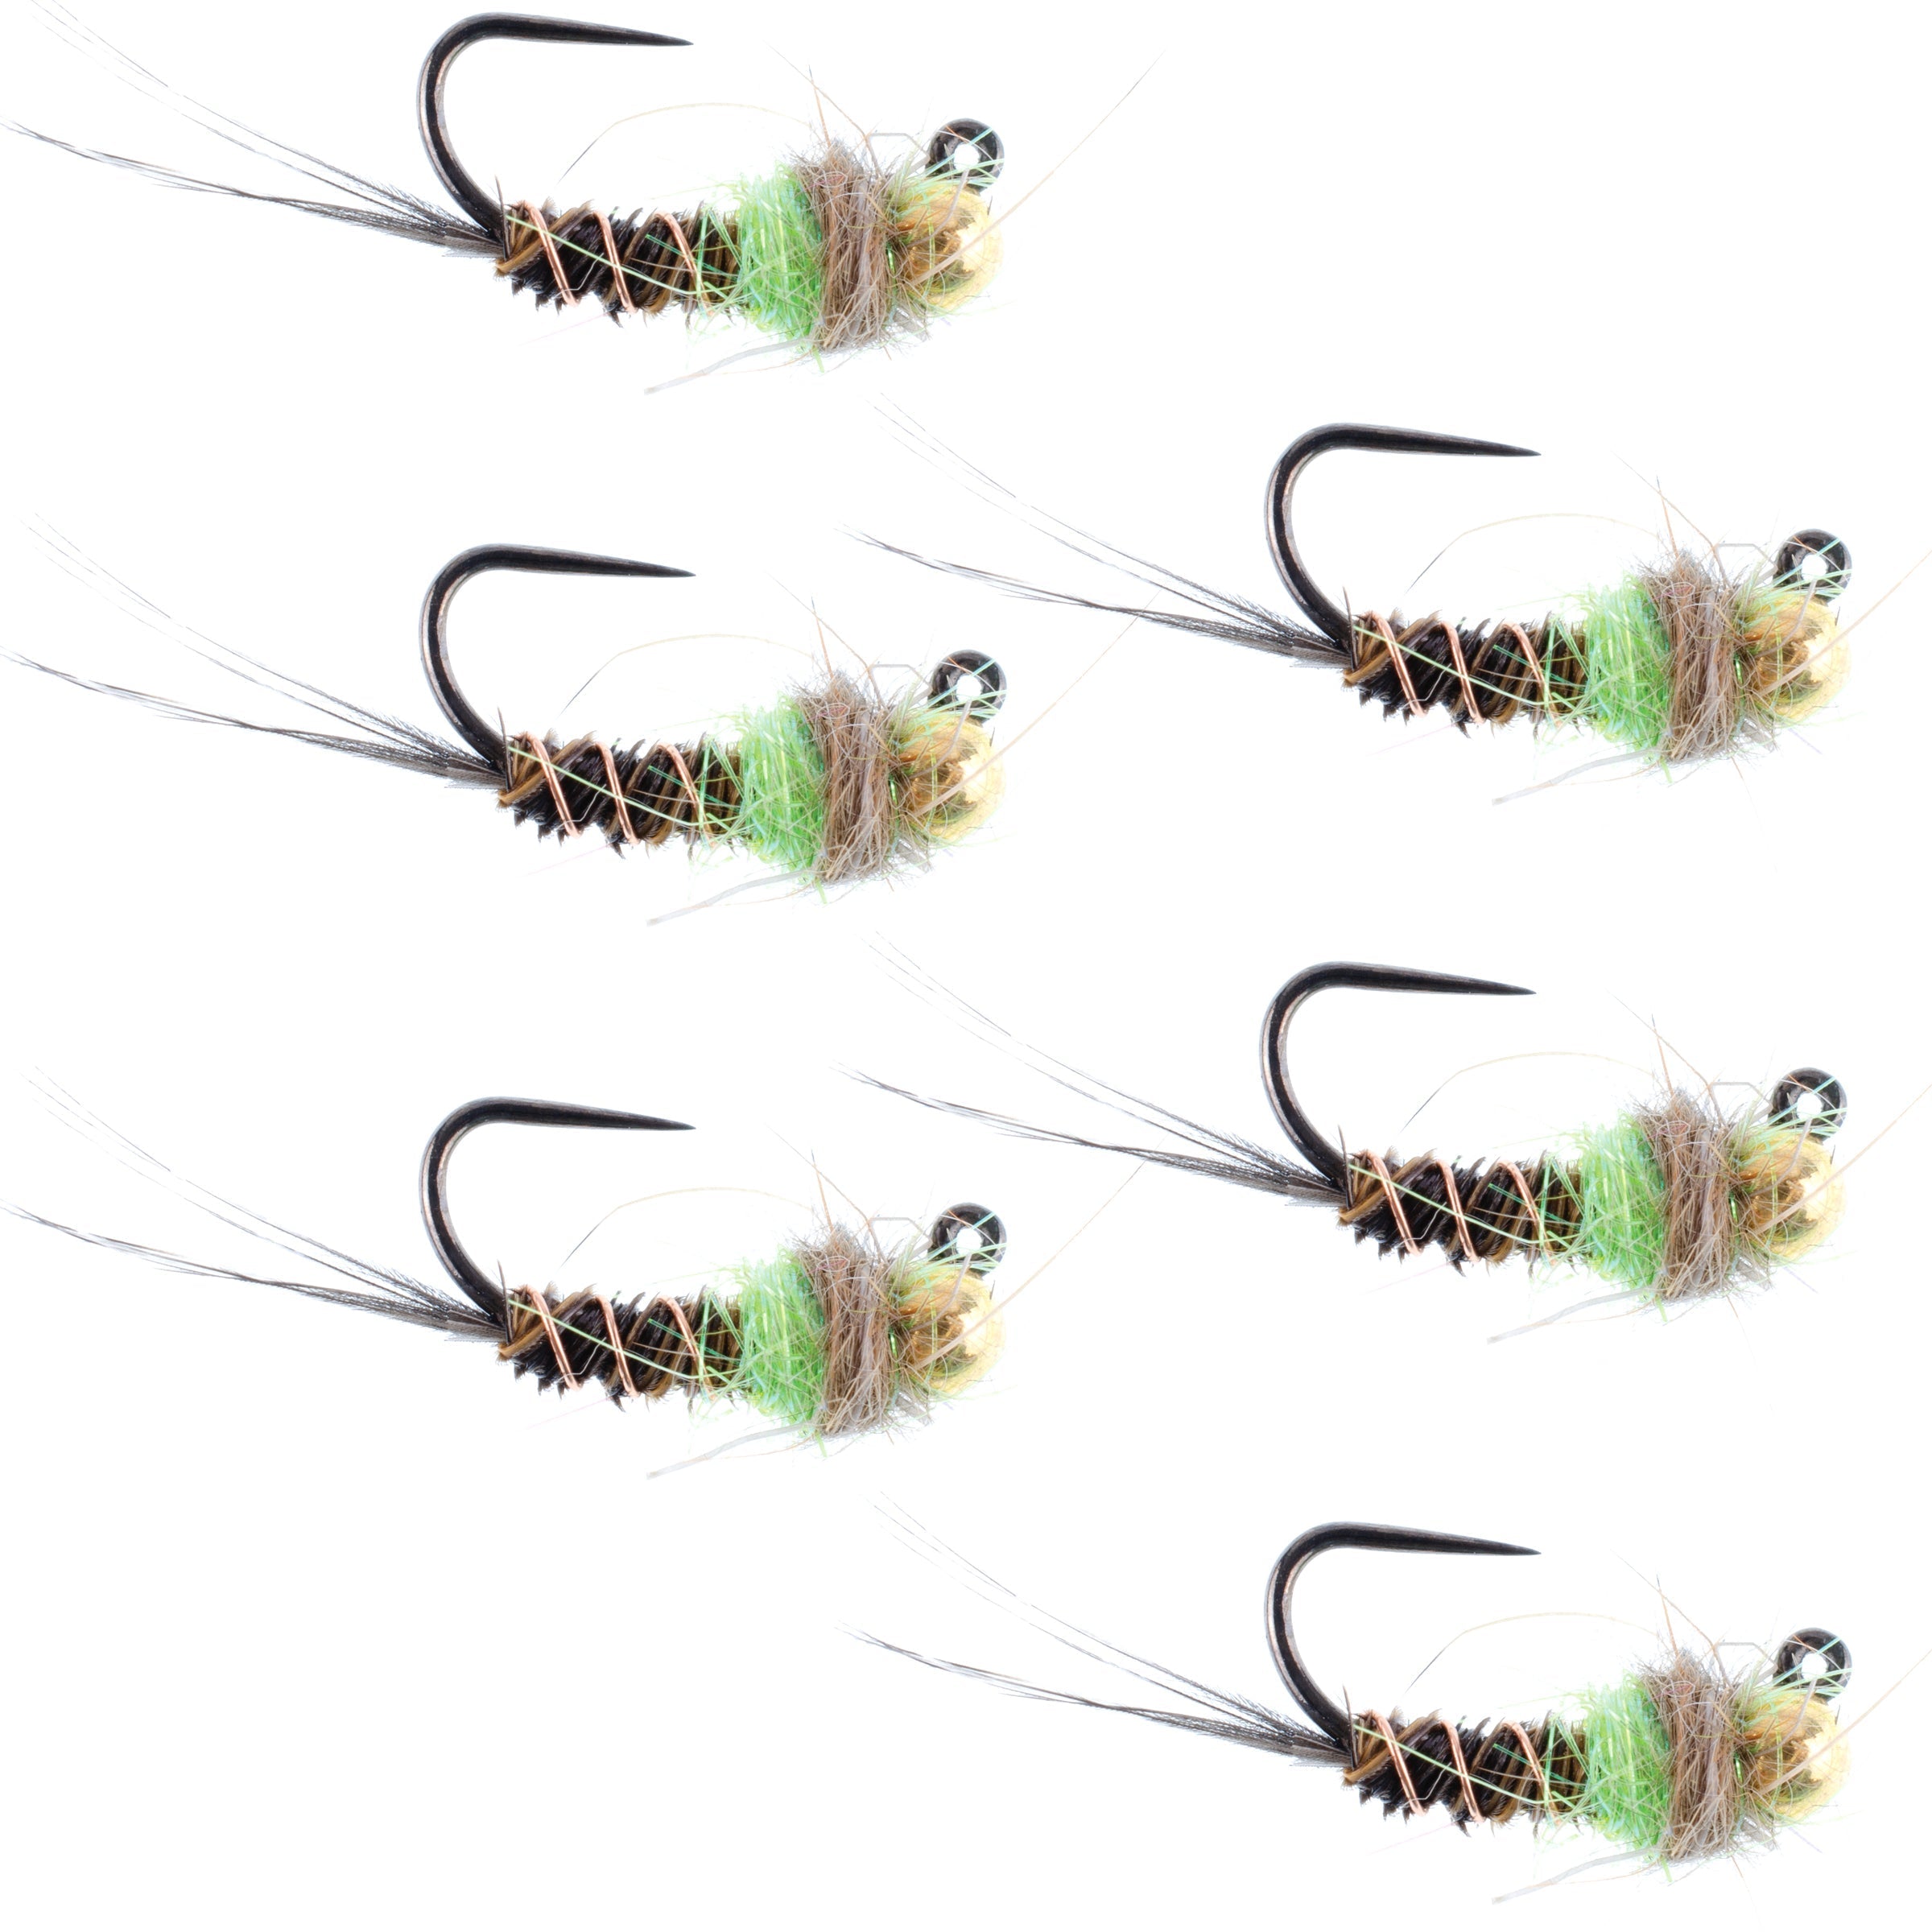 Tungsten Bead Hot Spot Pheasant Tail Tactical Jig Chartreuse Czech Nymph Euro Nymphing Fly - 6 Flies Size 12